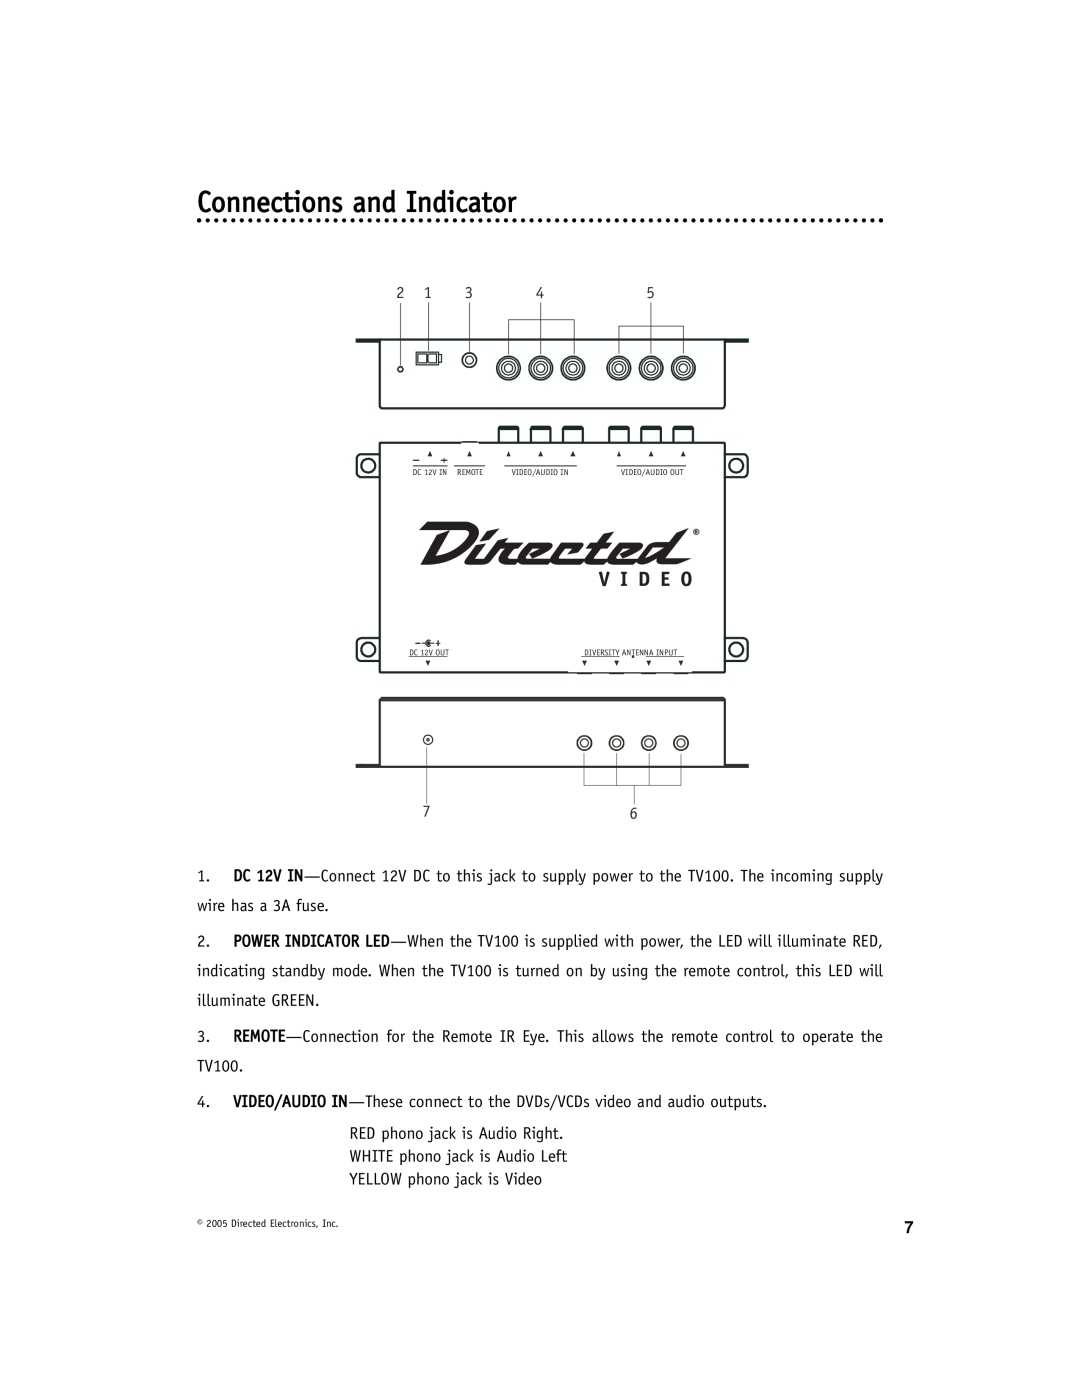 Directed Video TV100 manual Connections and Indicator 